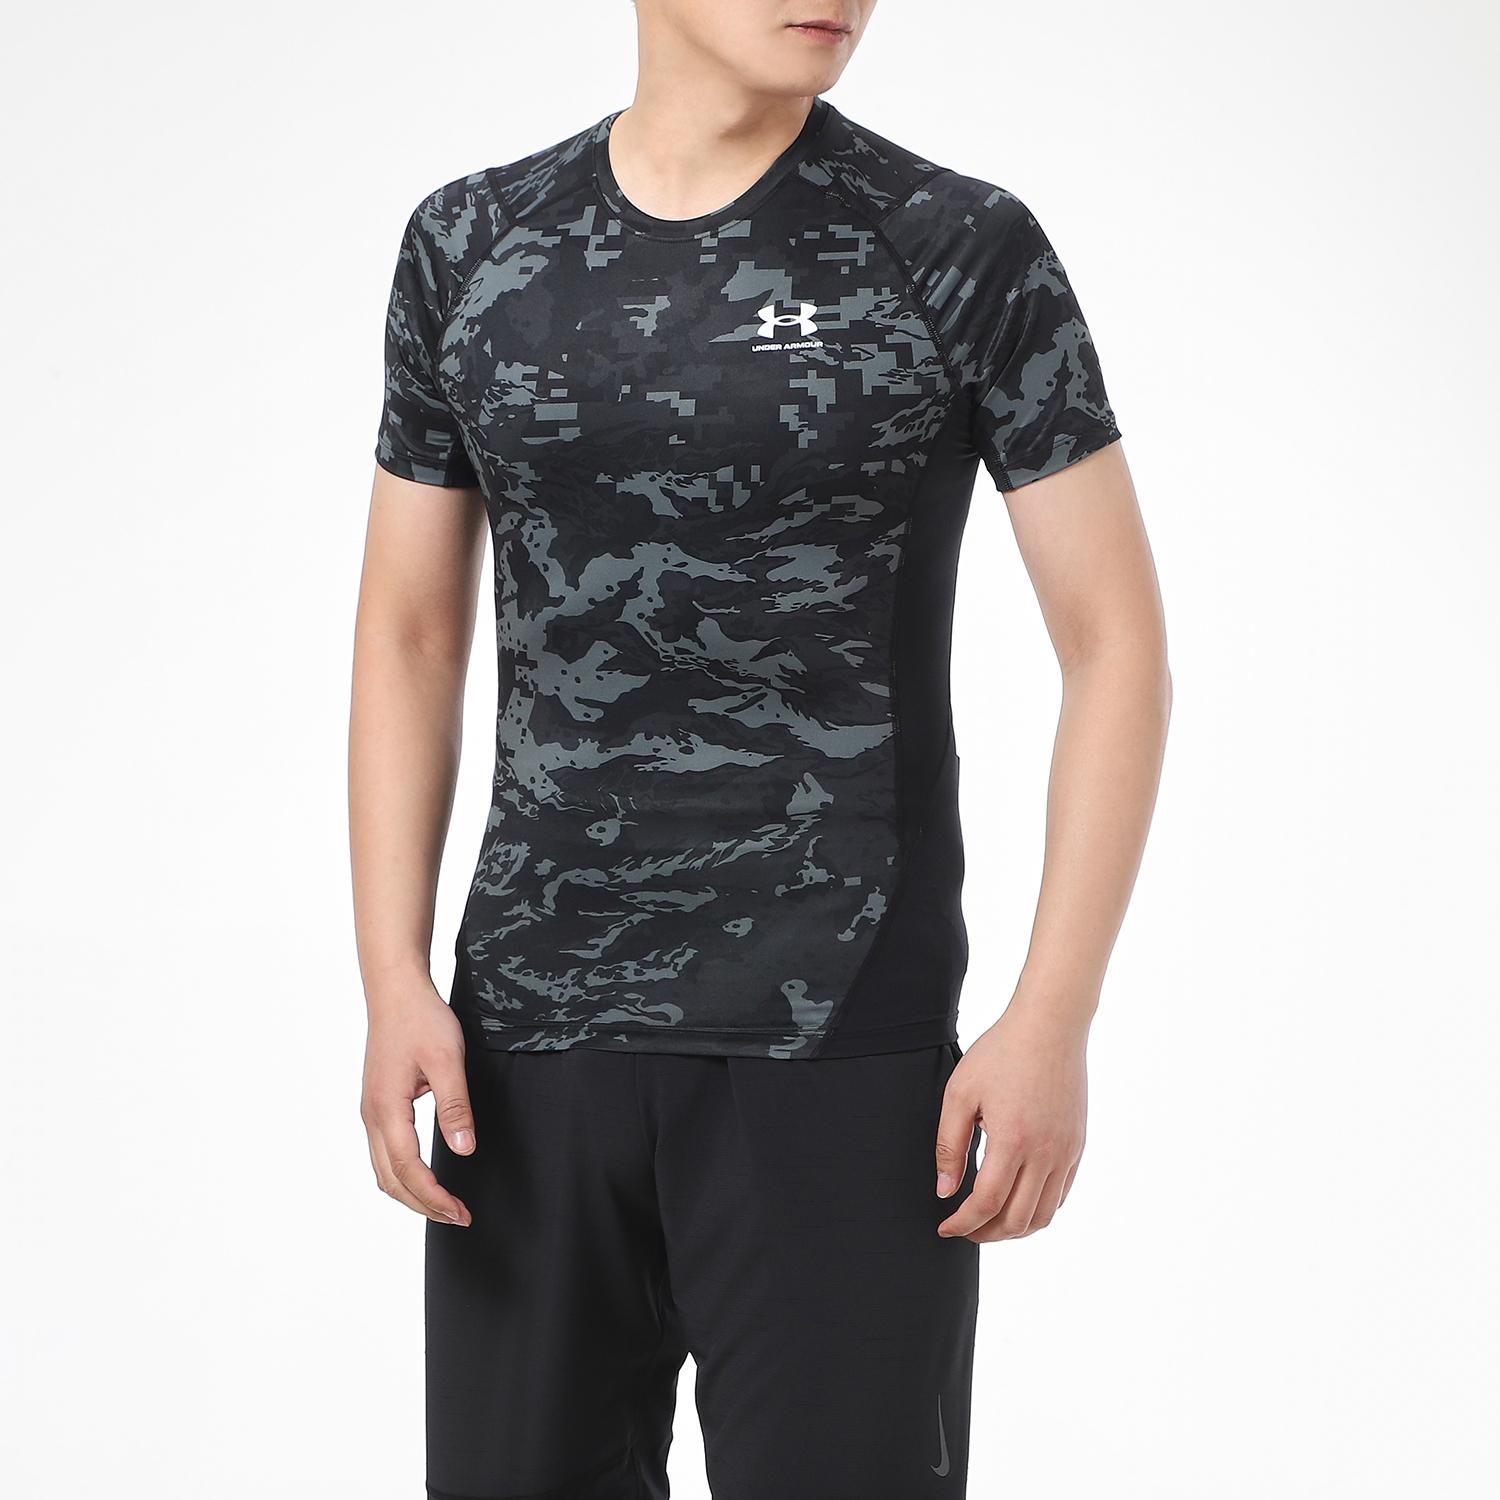 Under Armour SS21 T